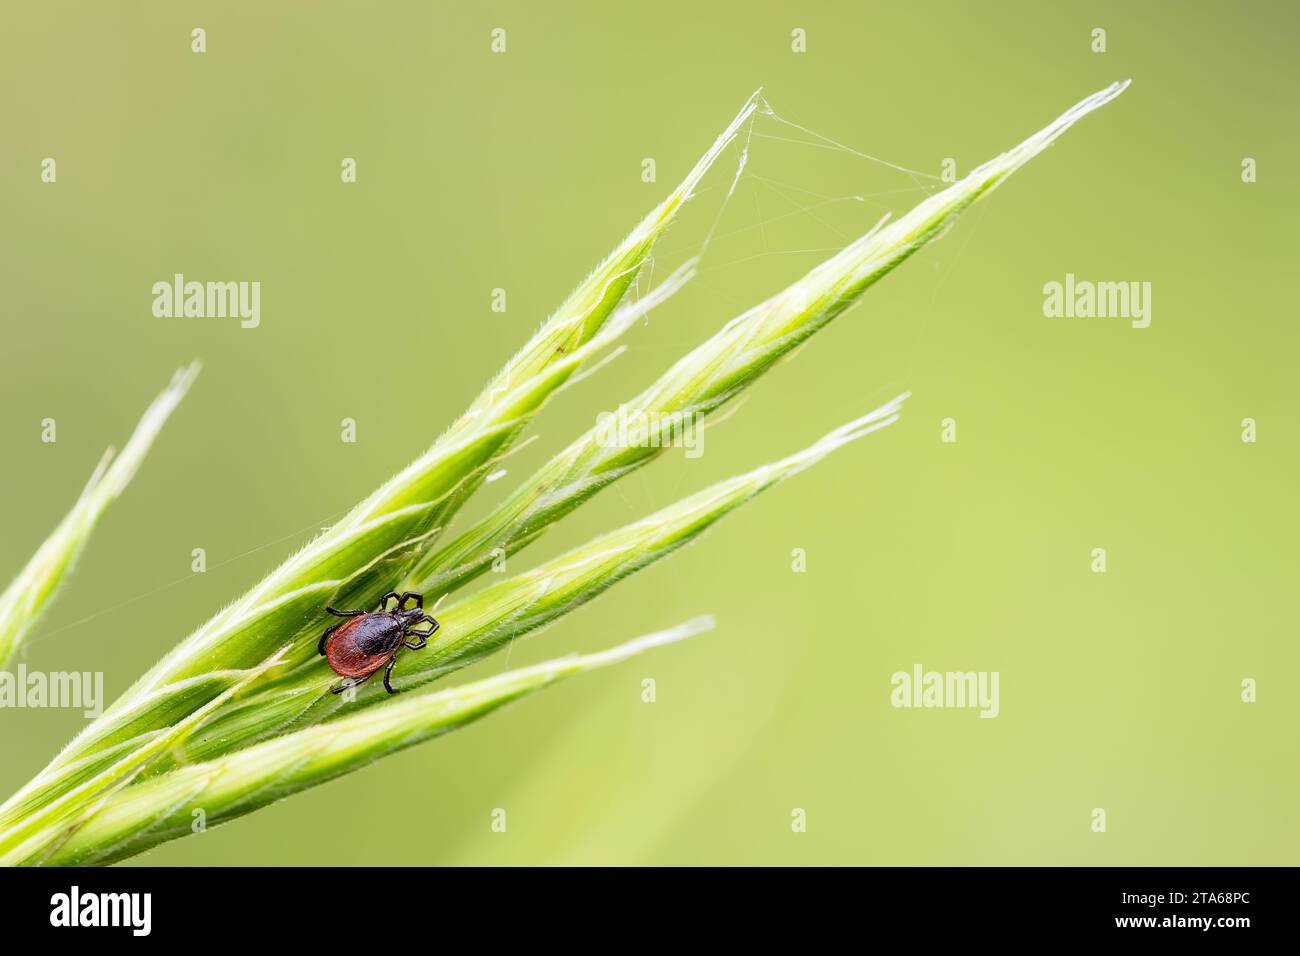 small common tick on a green grass with green background. Horizontal macro nature photograph. lyme disease carrier. Copy Space Stock Photo